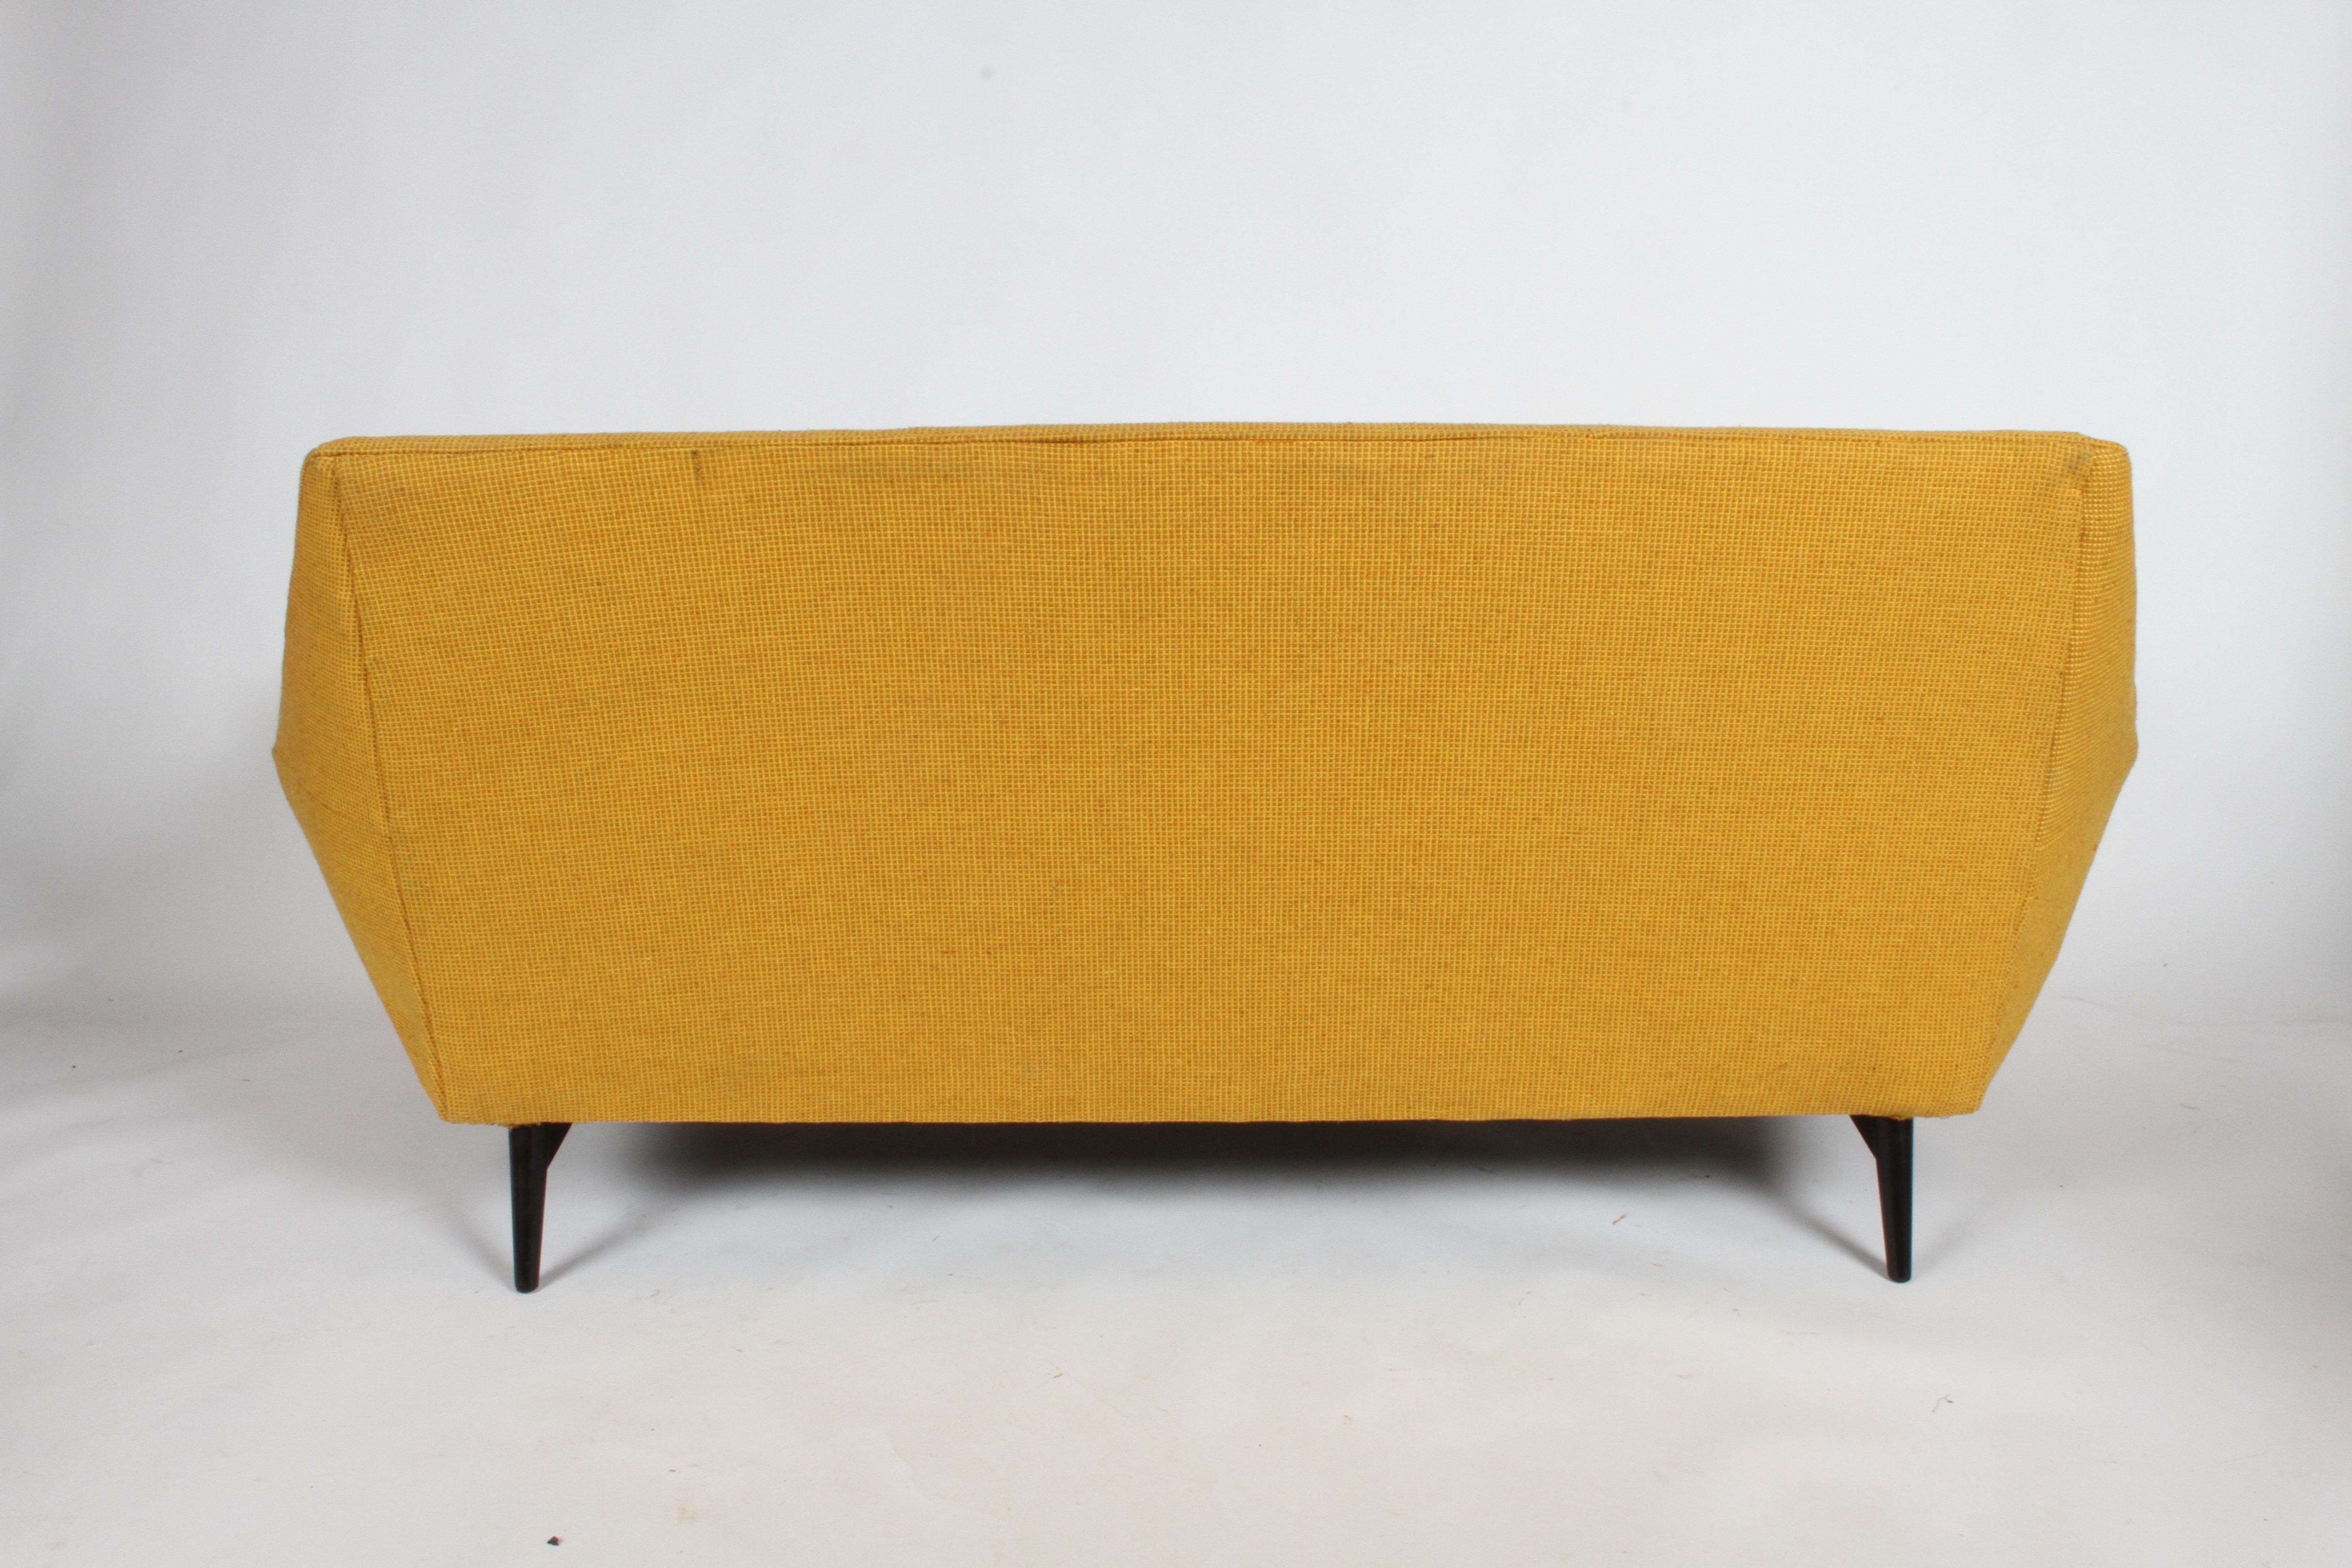 Upholstery Rare Mid-Century Modern Paul McCobb for Directional Sculptural Cubist Sofa  For Sale